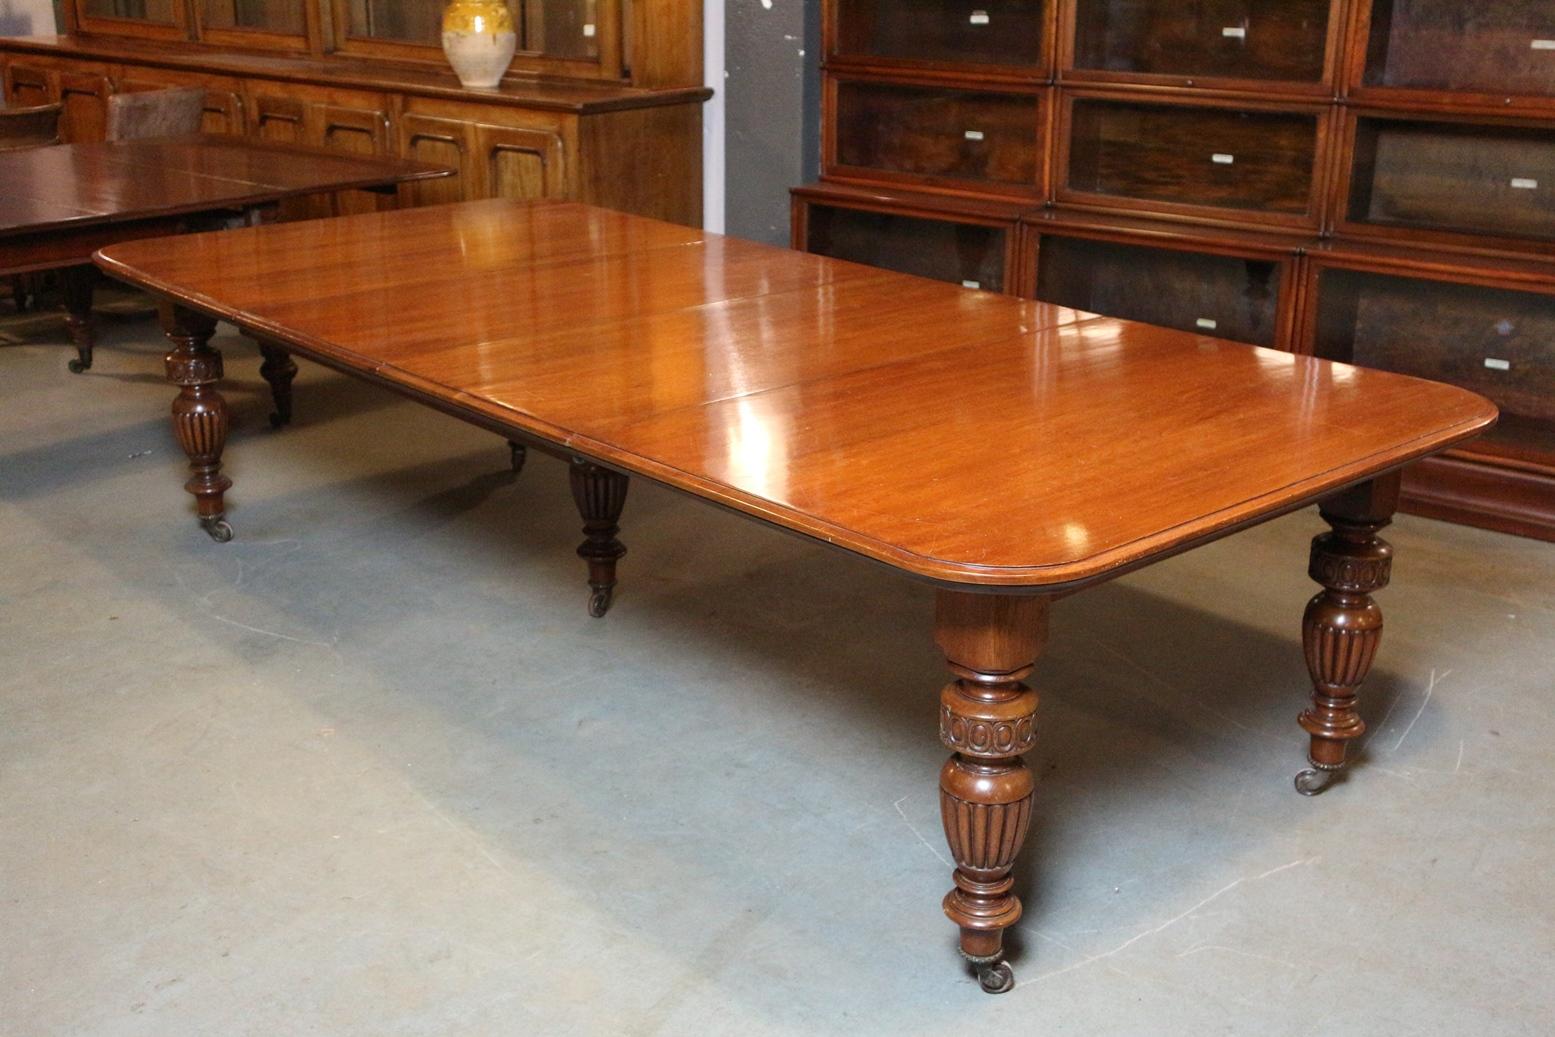 Impressive teak dining room table with 3 extra tops. Table has a fifth leg for extra stability. Table has traces of use on the top, otherwise in very good condition. Qualitatively very beautiful. The table is from colonial England (India) Table has